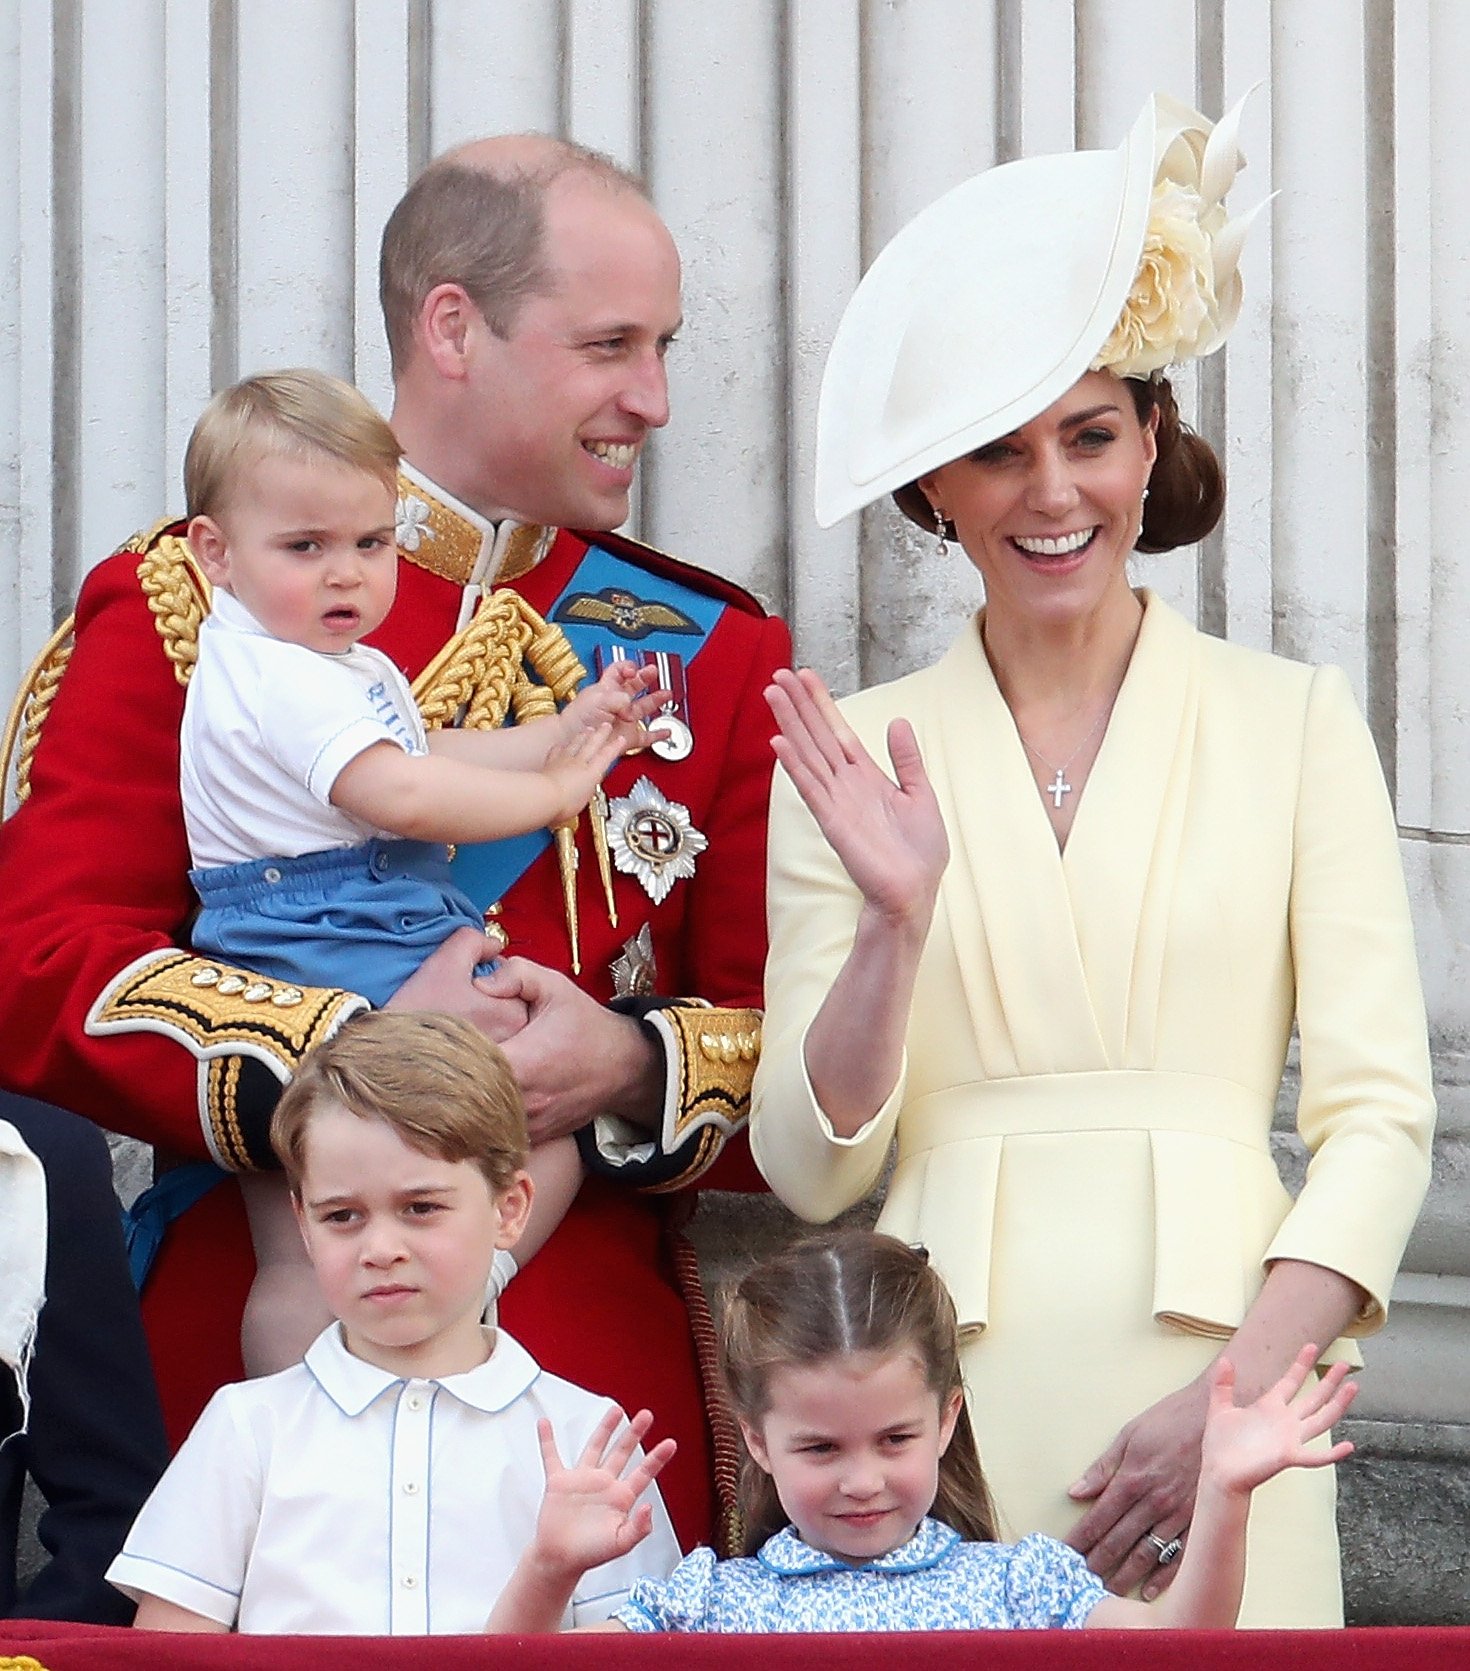 Prince William, Kate Middleton, Prince Louis, Prince George, and Princess Charlotte during Trooping The Colour on June 8, 2019 in London, England. | Photo: GettyImages